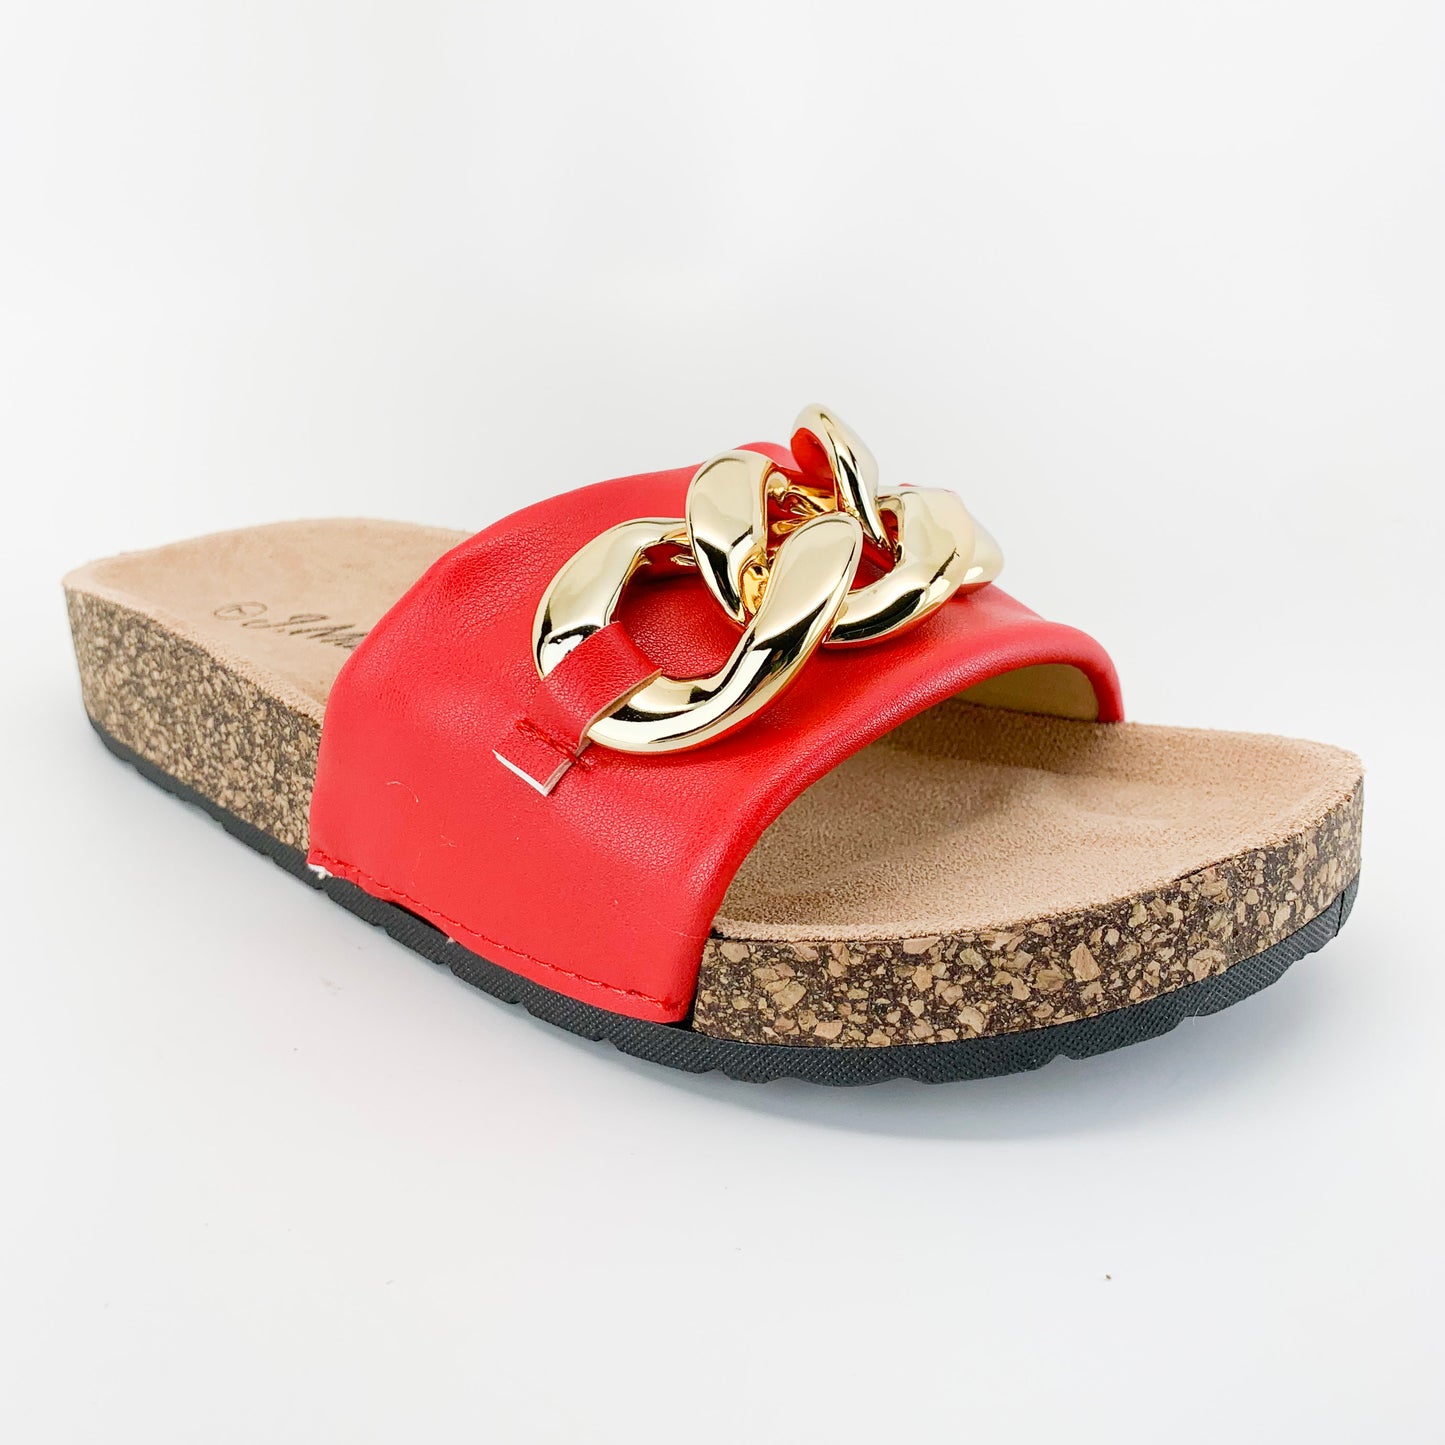 j.mark urban-34 red sandal with chain